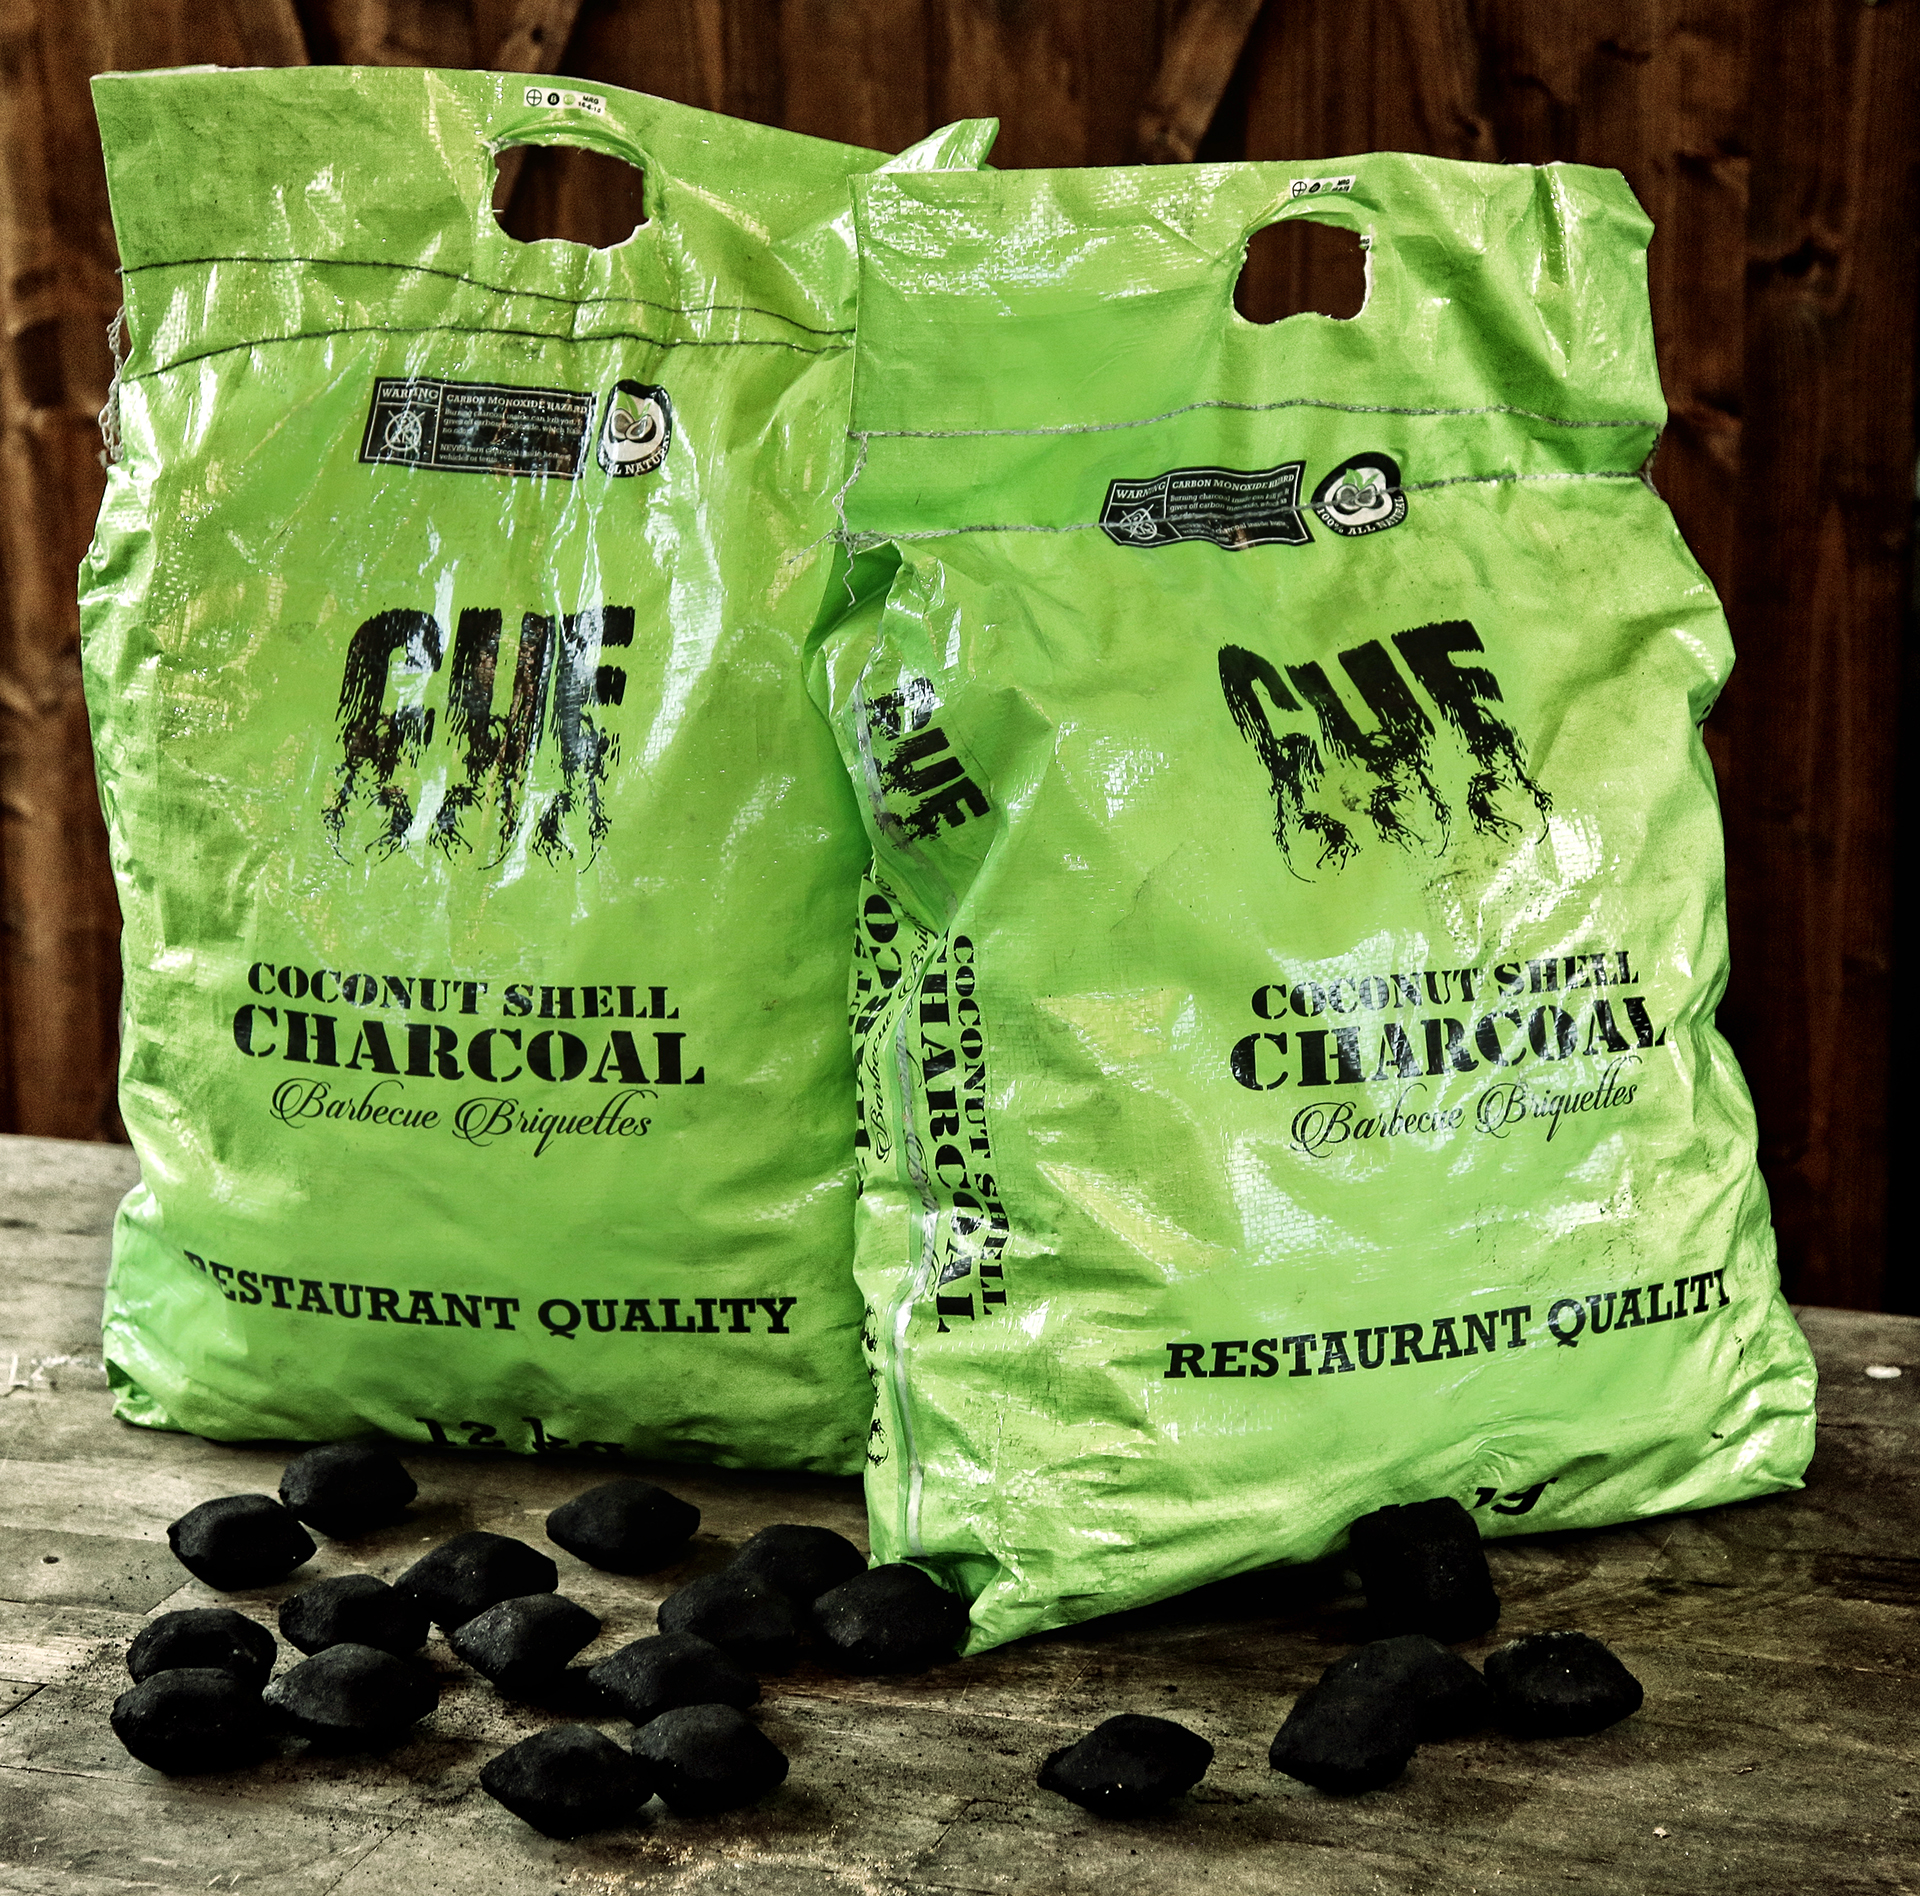 100% Natural & Eco-Friendly. Anna Coconut Shell Charcoal Barbecue Briquettes 5 KG/Export Quality Long Burning Hour 